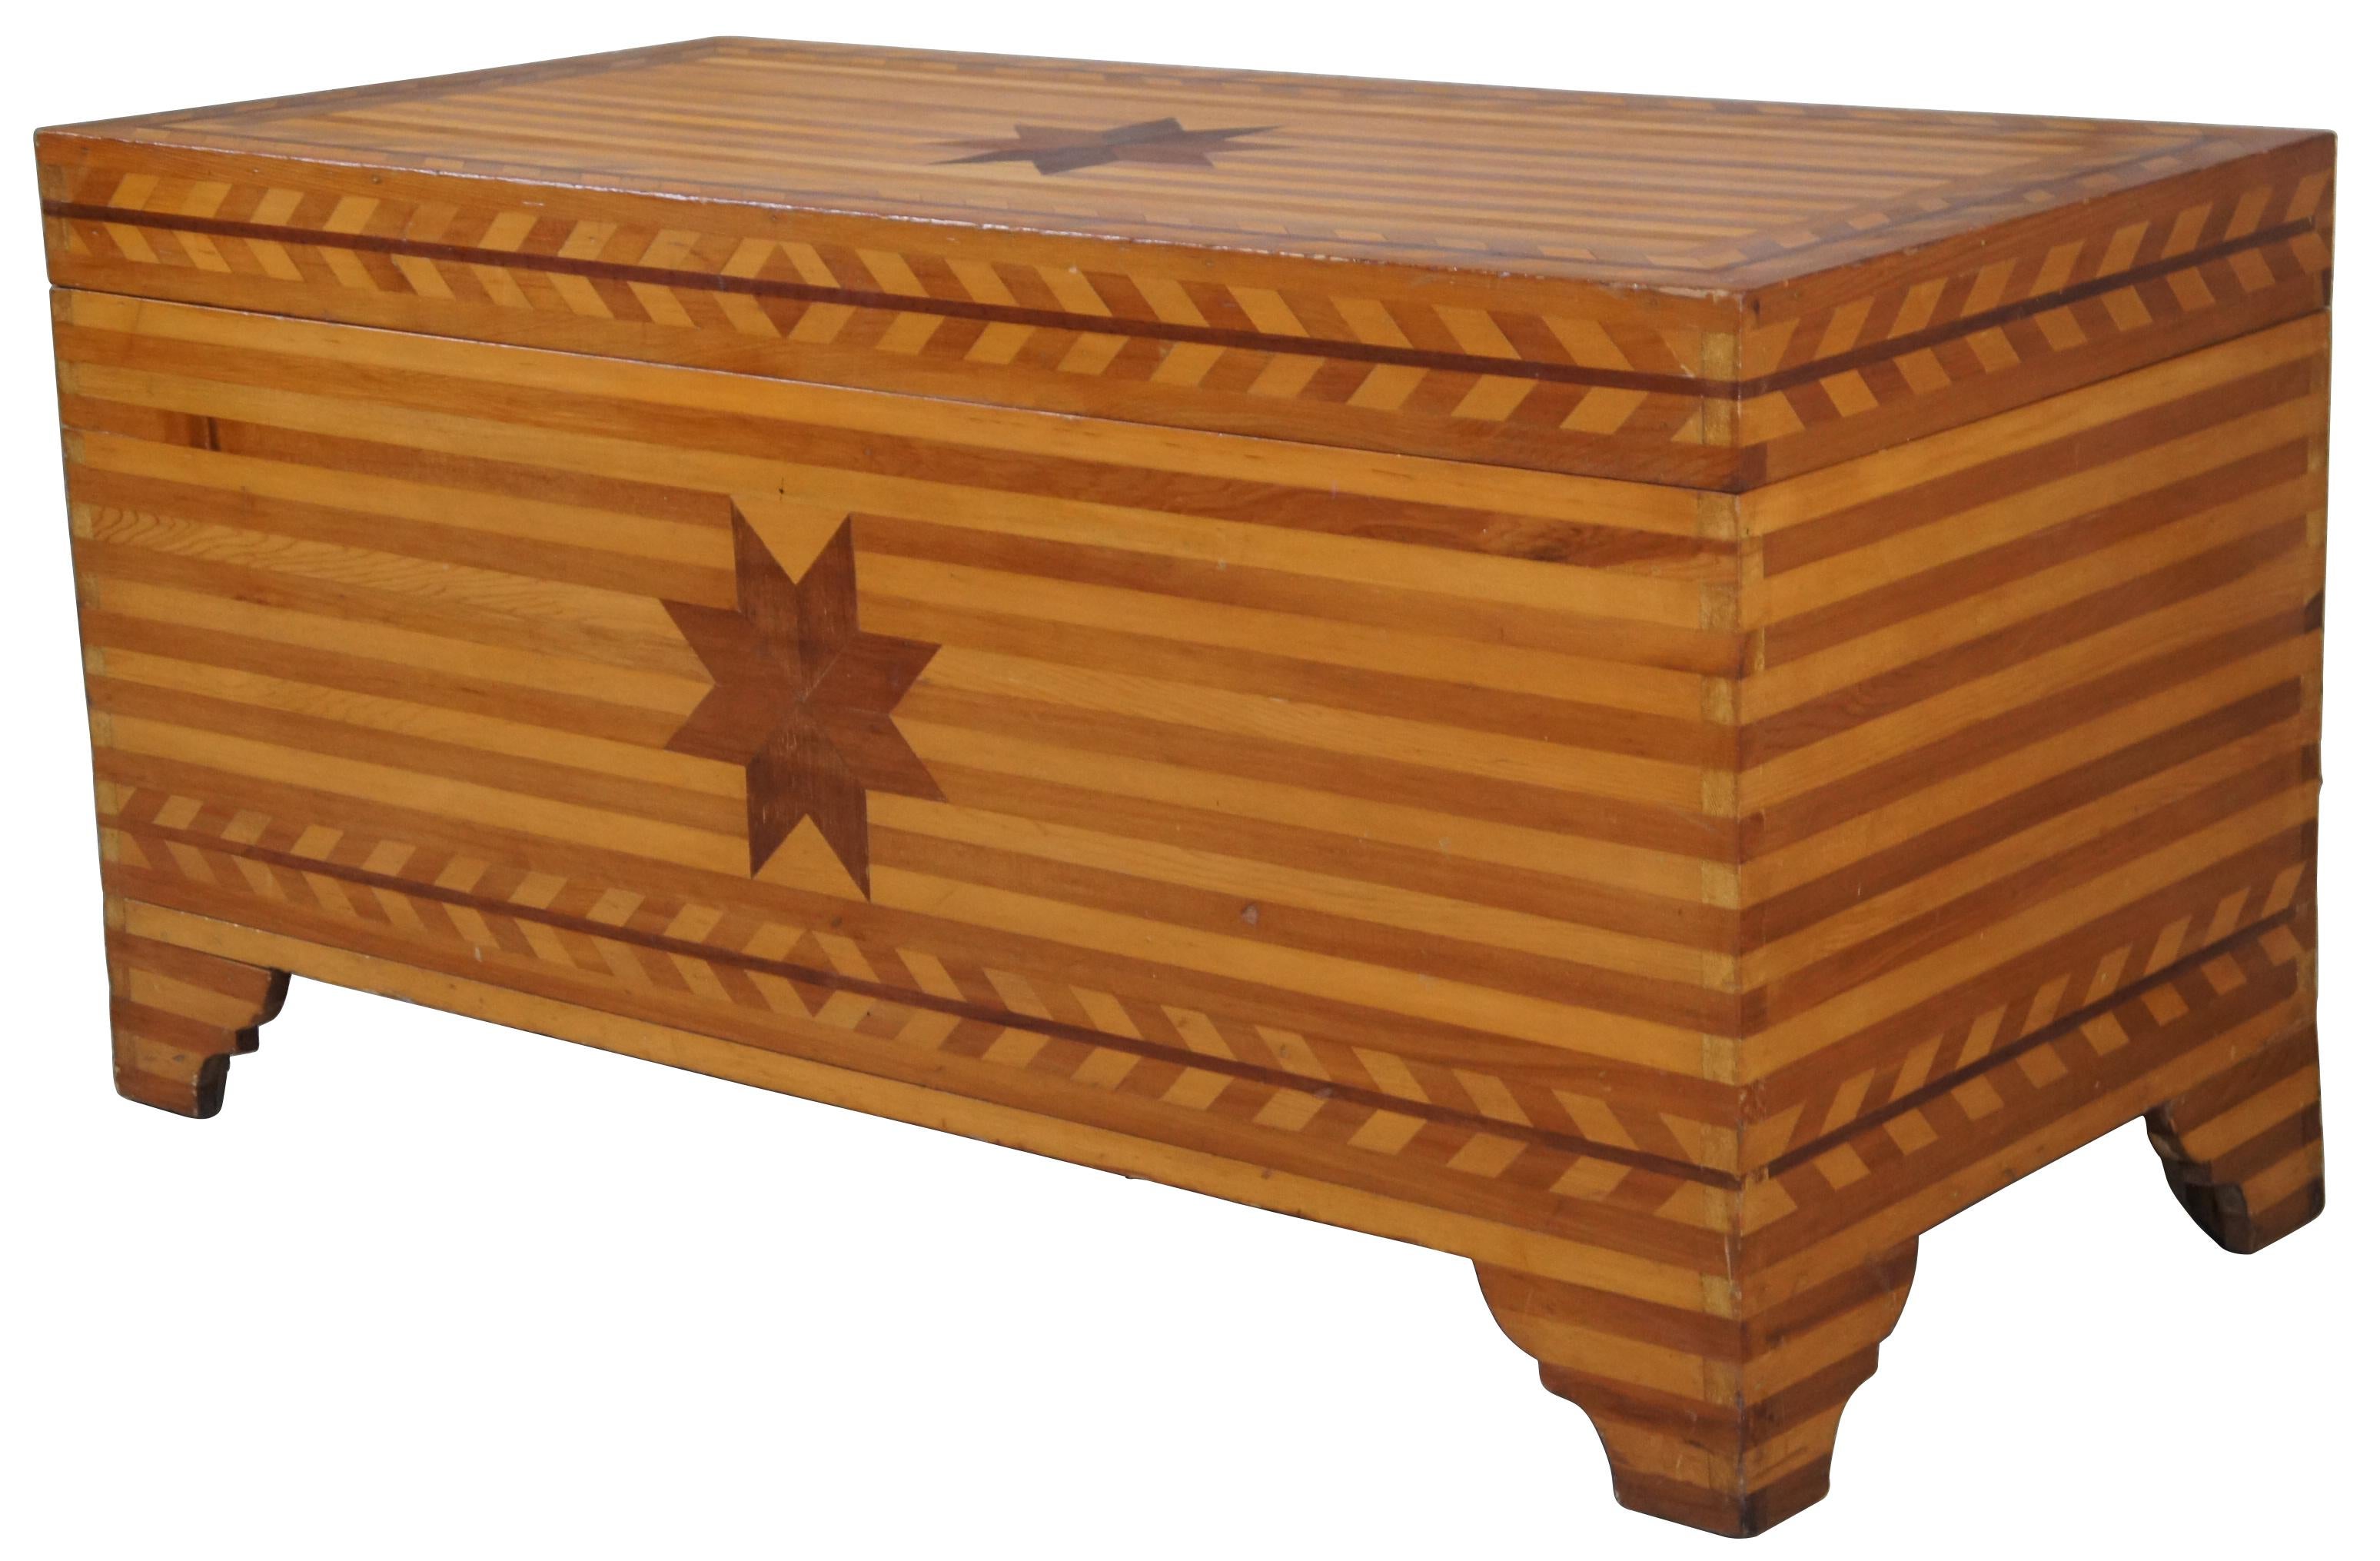 Antique Early American pine Folk Art farmhouse dowry or blanket chest featuring striped geometric parquetry design with lone stars. Acquired in the 1980’s from a Salt Lake City estate, retaining its original tags from Railway Express Agency,